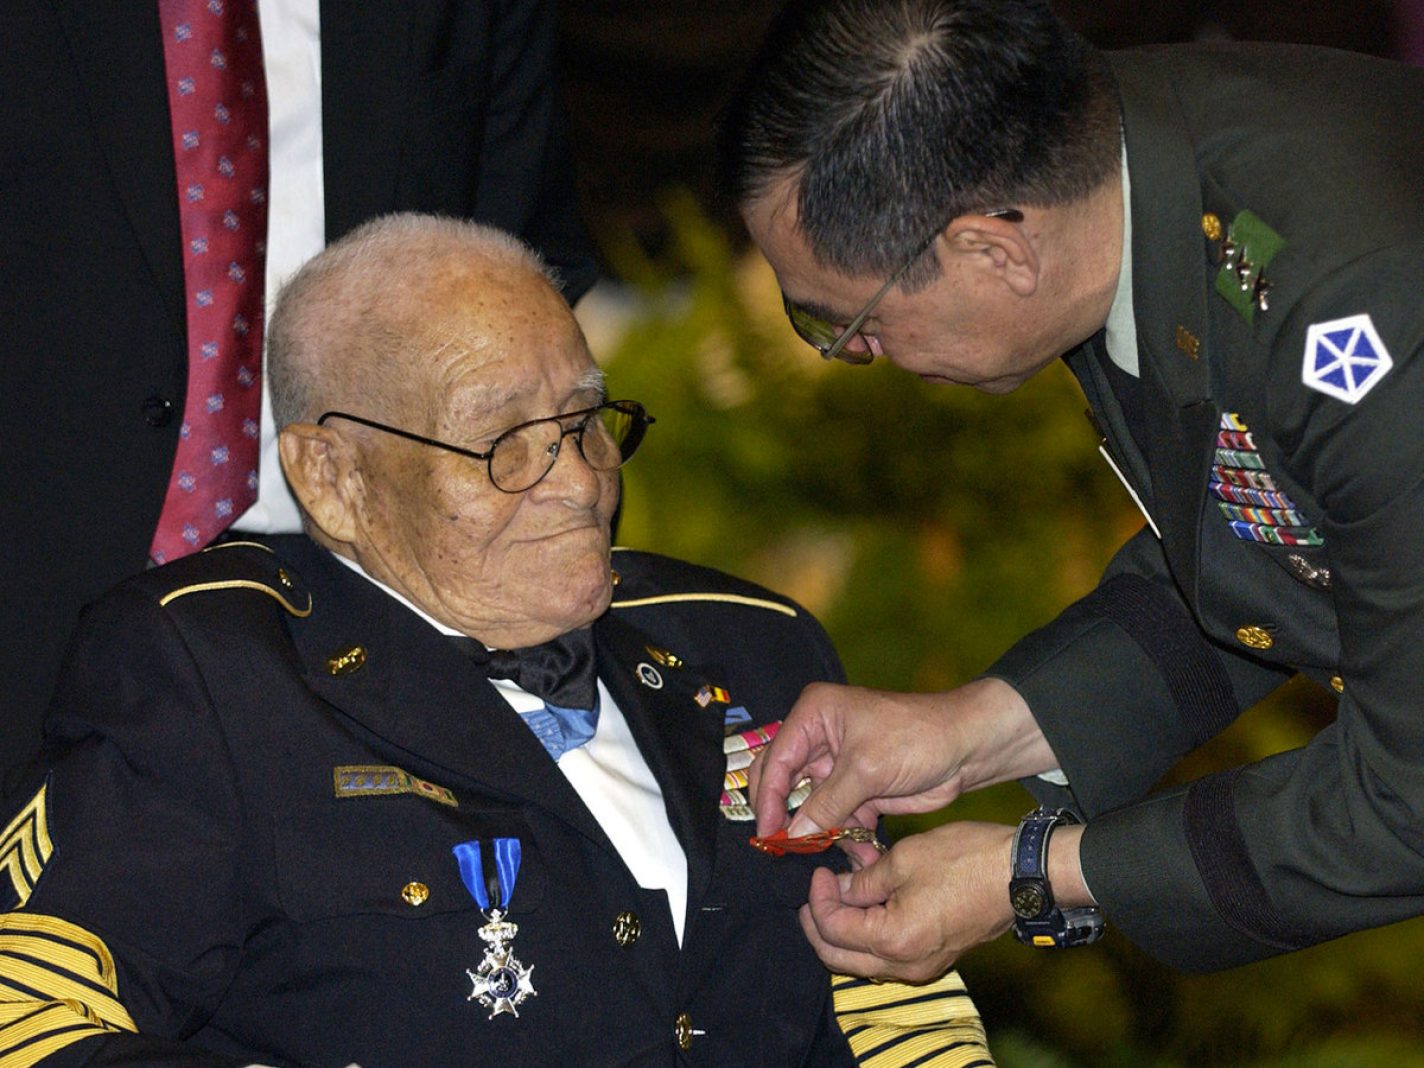 do medal of honor recipients have to retire